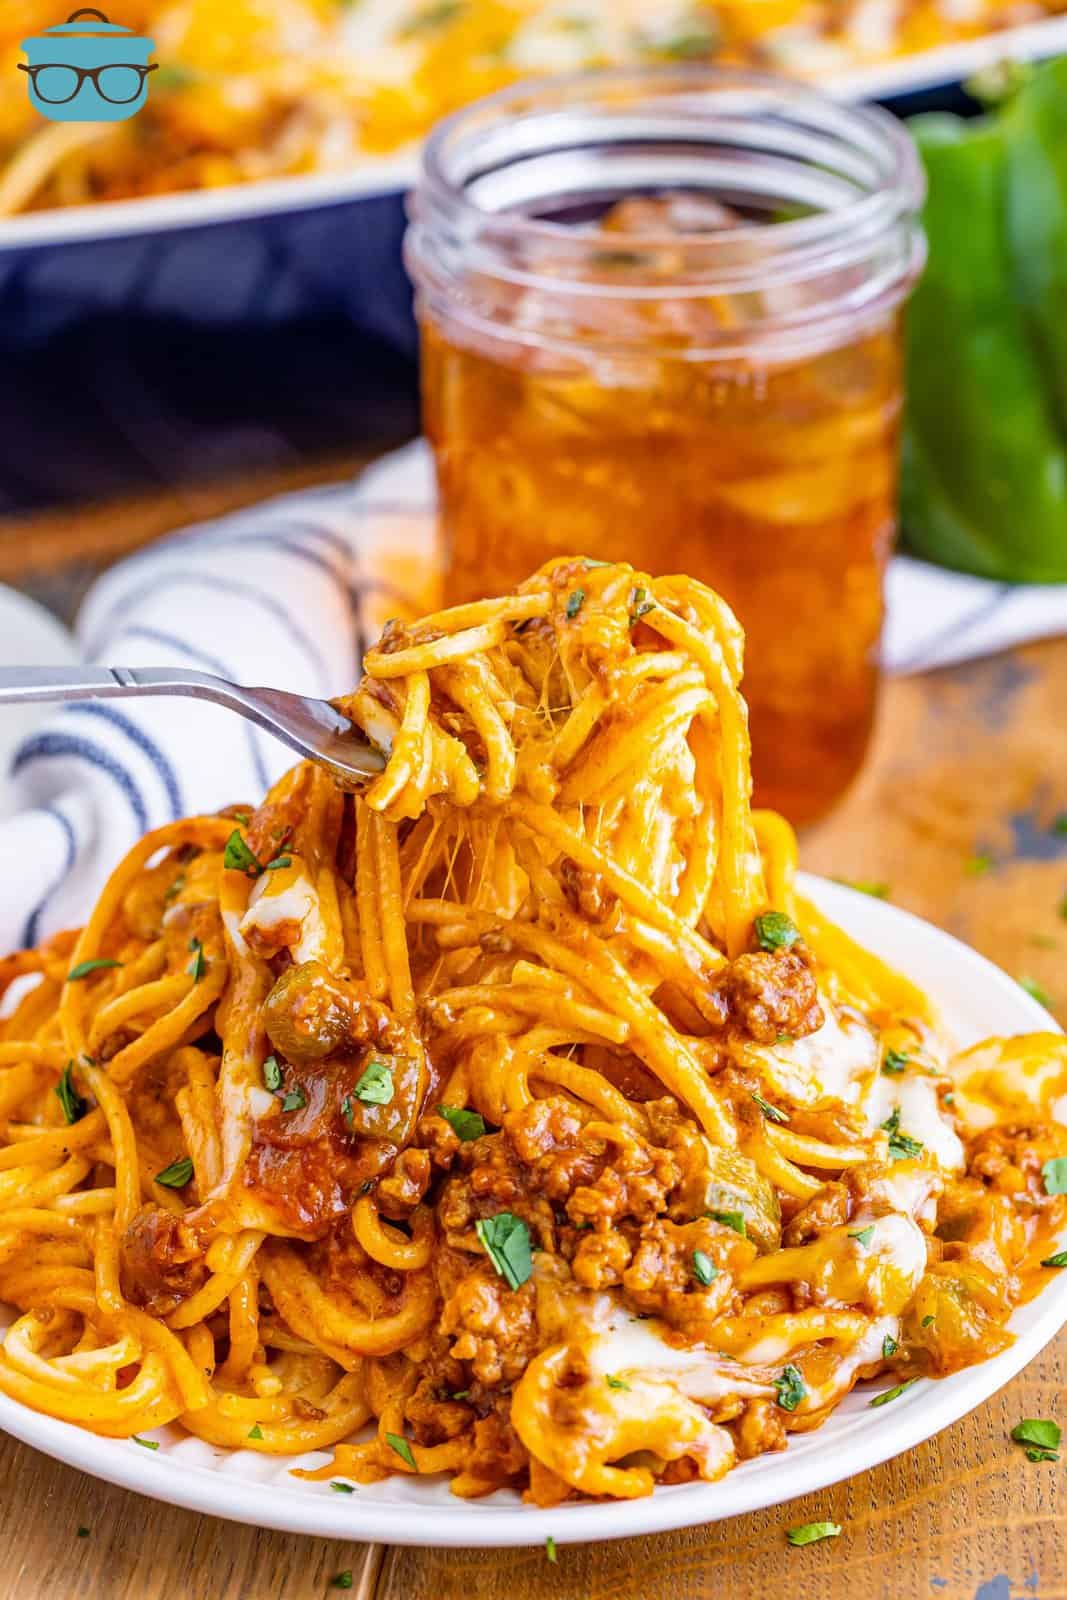 A fork holding a bite of Mexican million dollar spaghetti over a plate of spaghetti.